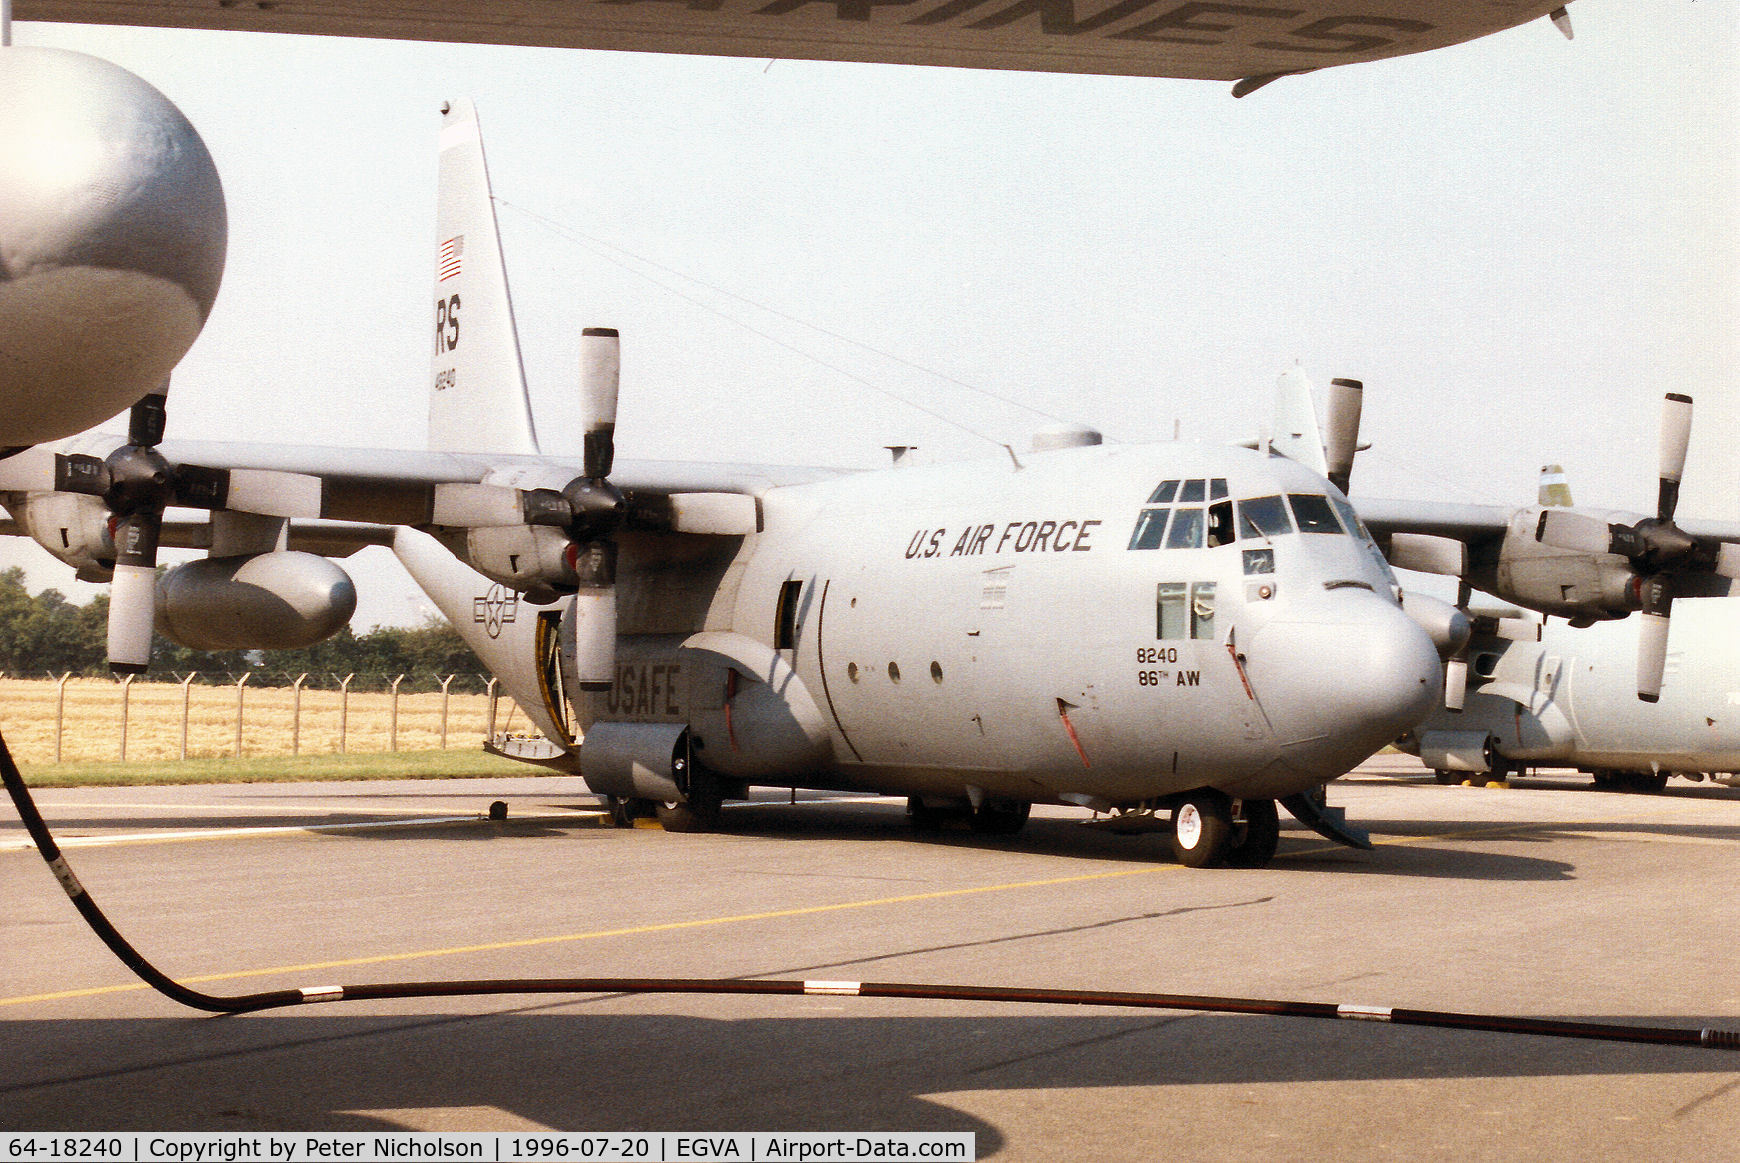 64-18240, Lockheed C-130E Hercules C/N 382-4105, C-130E Hercules of 37th Airlift Squadron/86th Wing based at Ramstein on display at the 1996 Royal Intnl Air Tattoo at RAF Fairford.